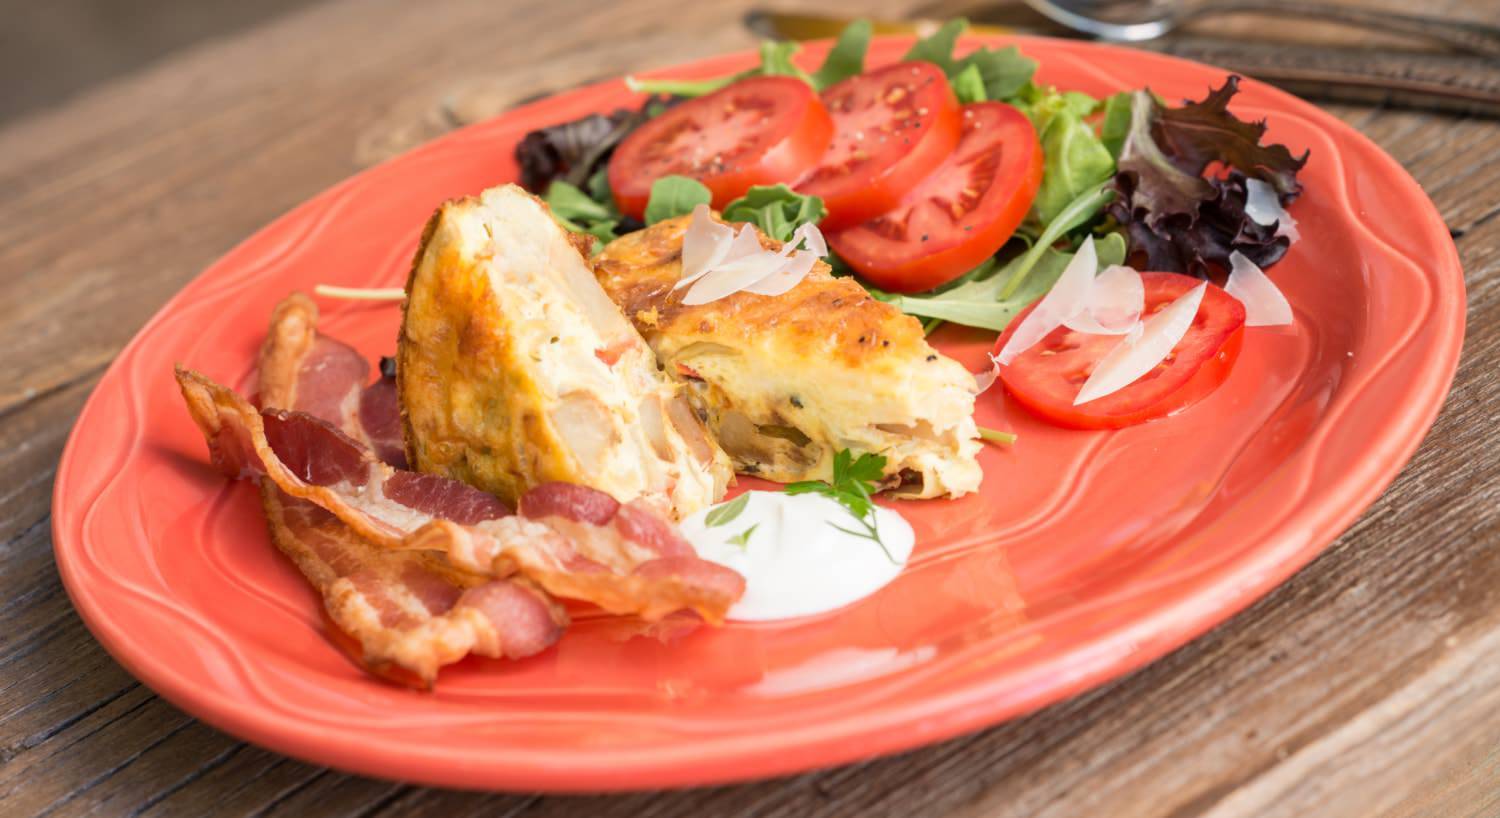 Orange plate with bacon, quiche, sliced tomatoes, and lettuce